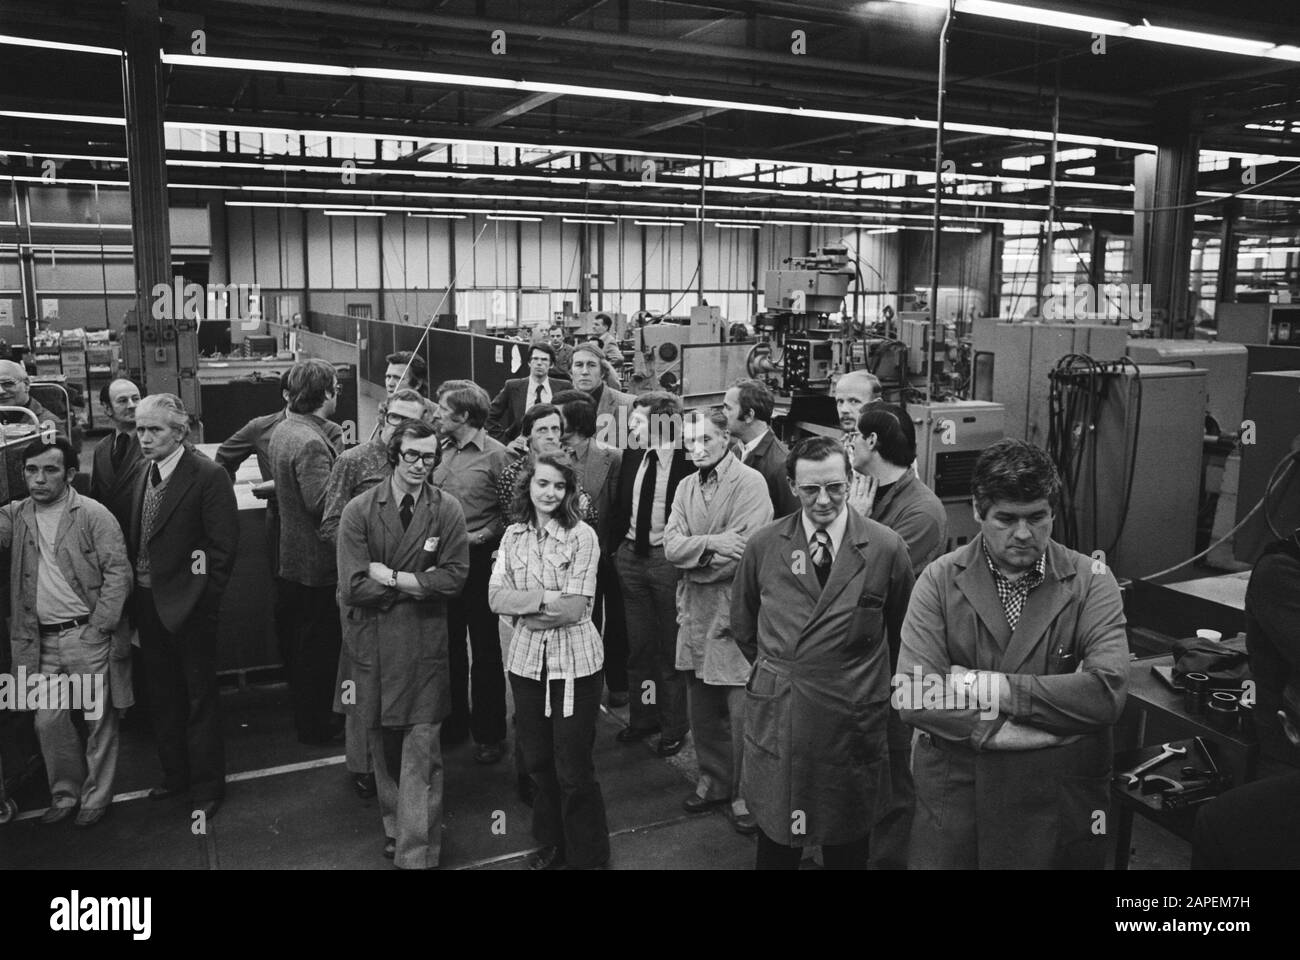 Occupation Tealtronic; employees during meeting in the factory hall Date: 10 January 1977 Keywords: occupancy, WORKERS, meetings Stock Photo